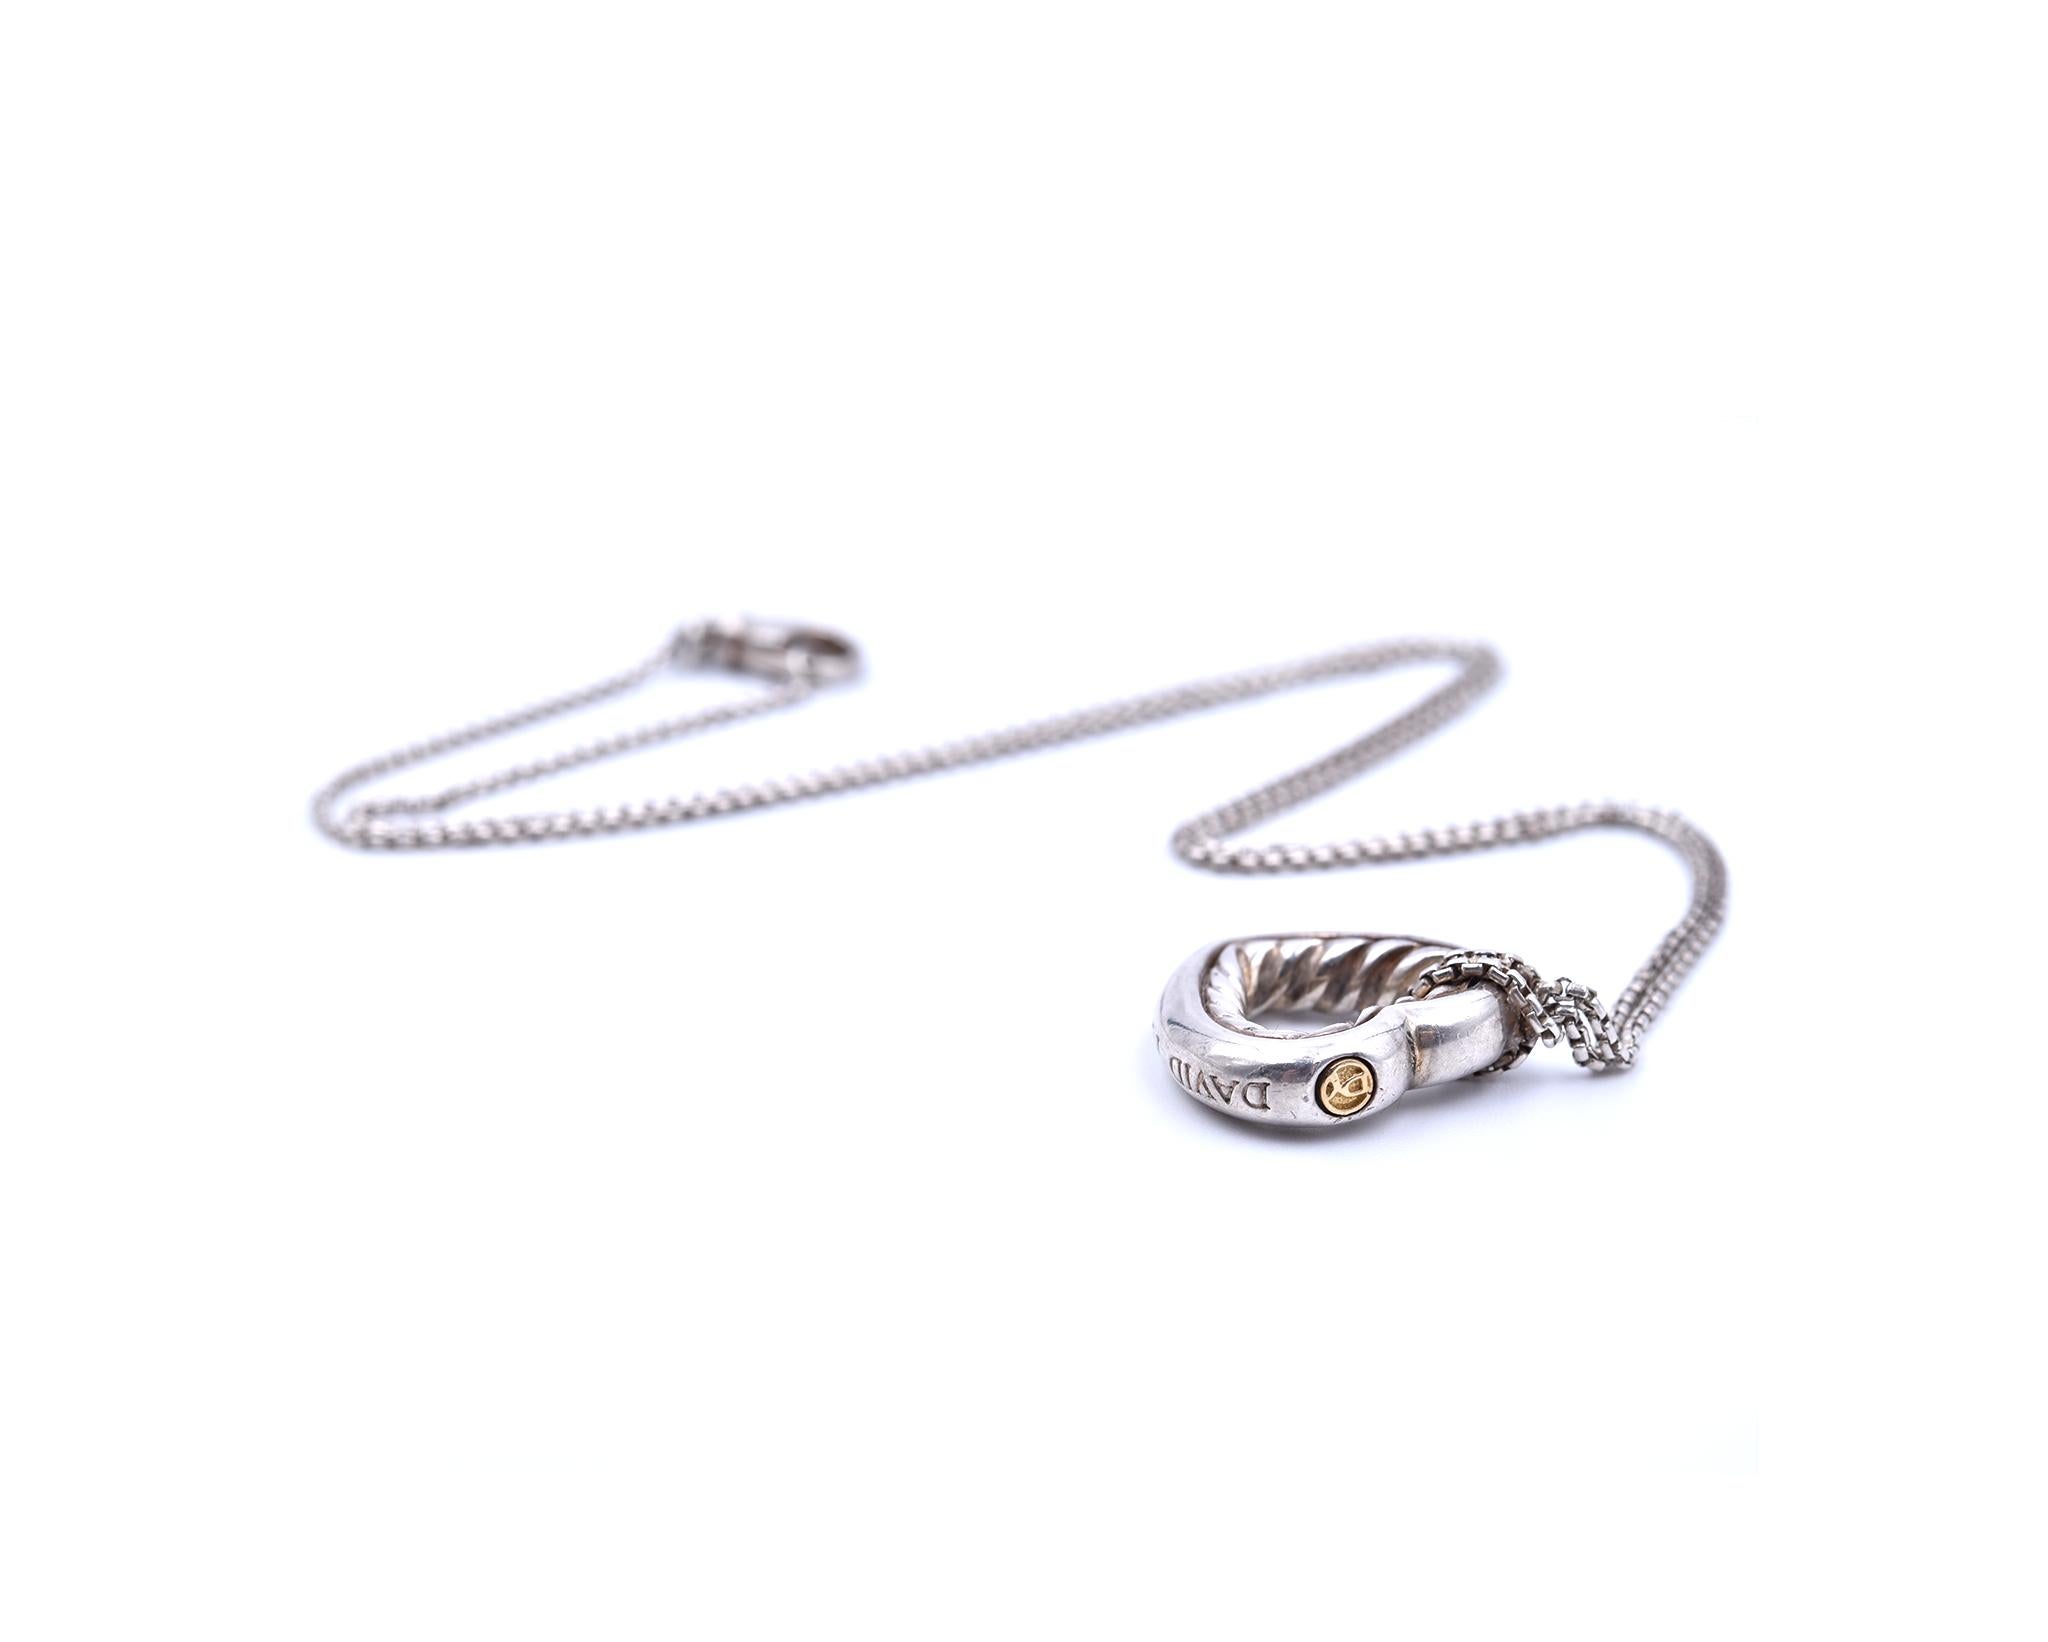 Designer: David Yurman
Collection: Cable Collection
Material: sterling silver
Dimensions: pendant measures 3/4-inch long and 3/4-inch wide, necklace measures 
Weight: 23.10 grams
